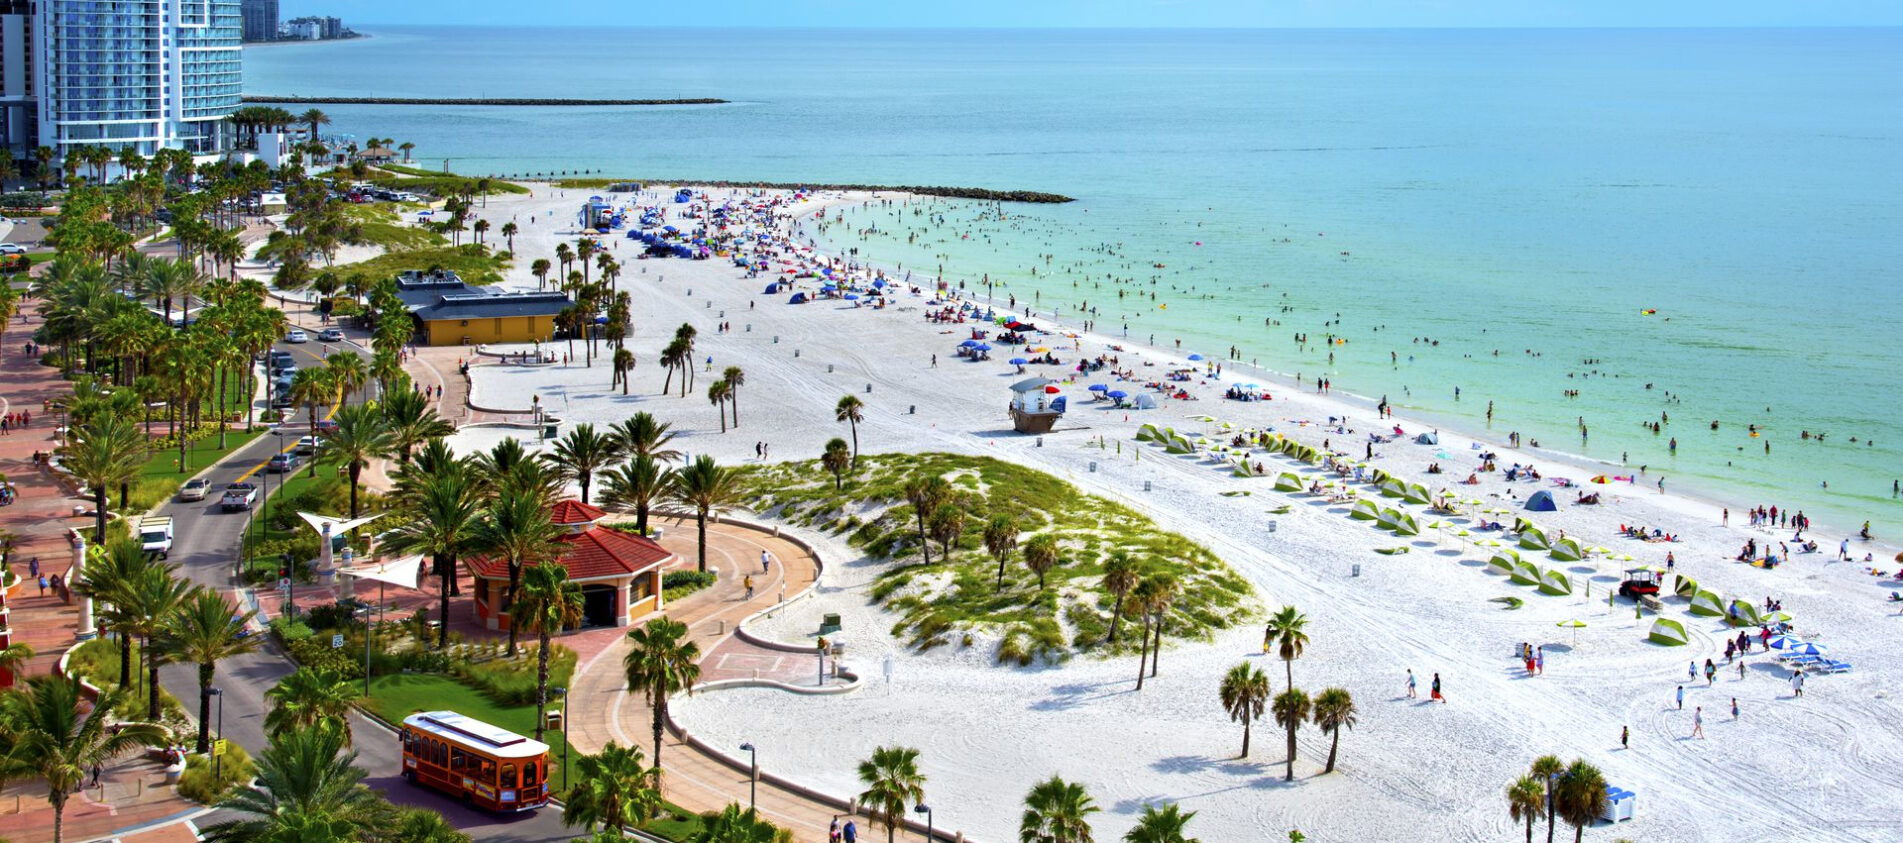 Vacation at Clearwater Beach
